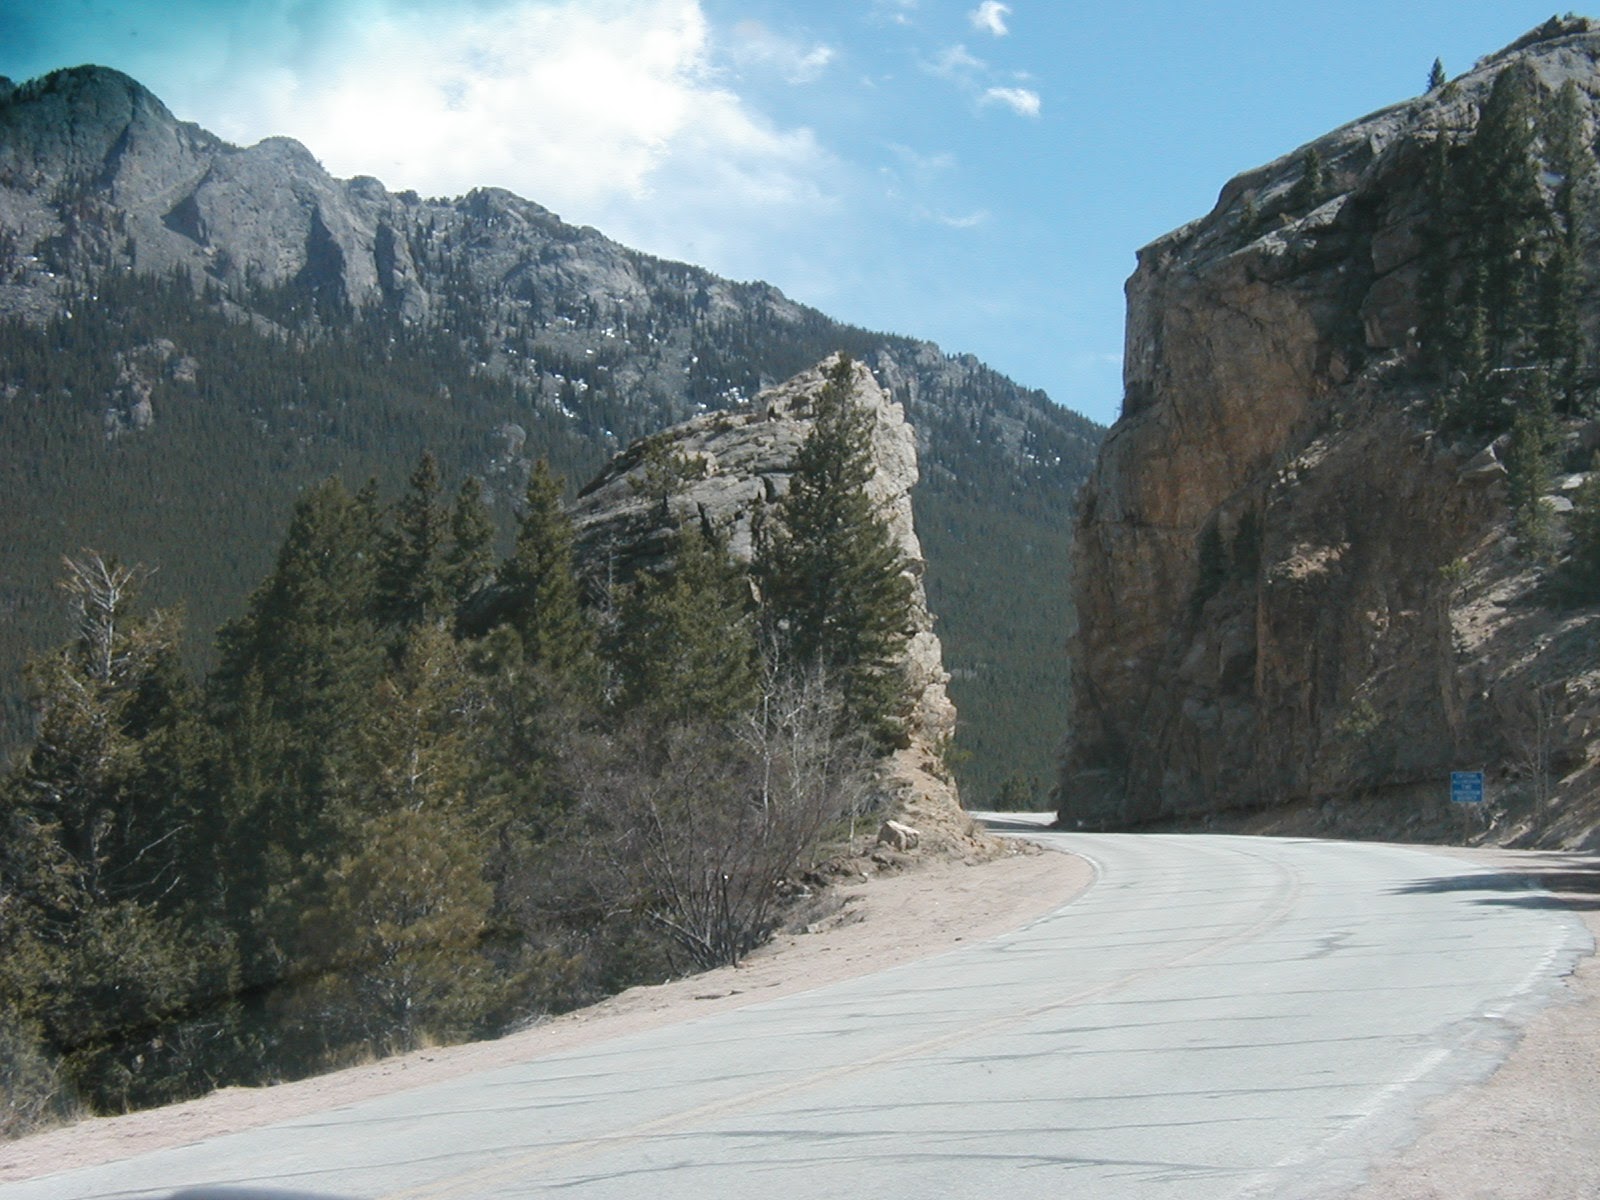 Canyon drive in the Rockies